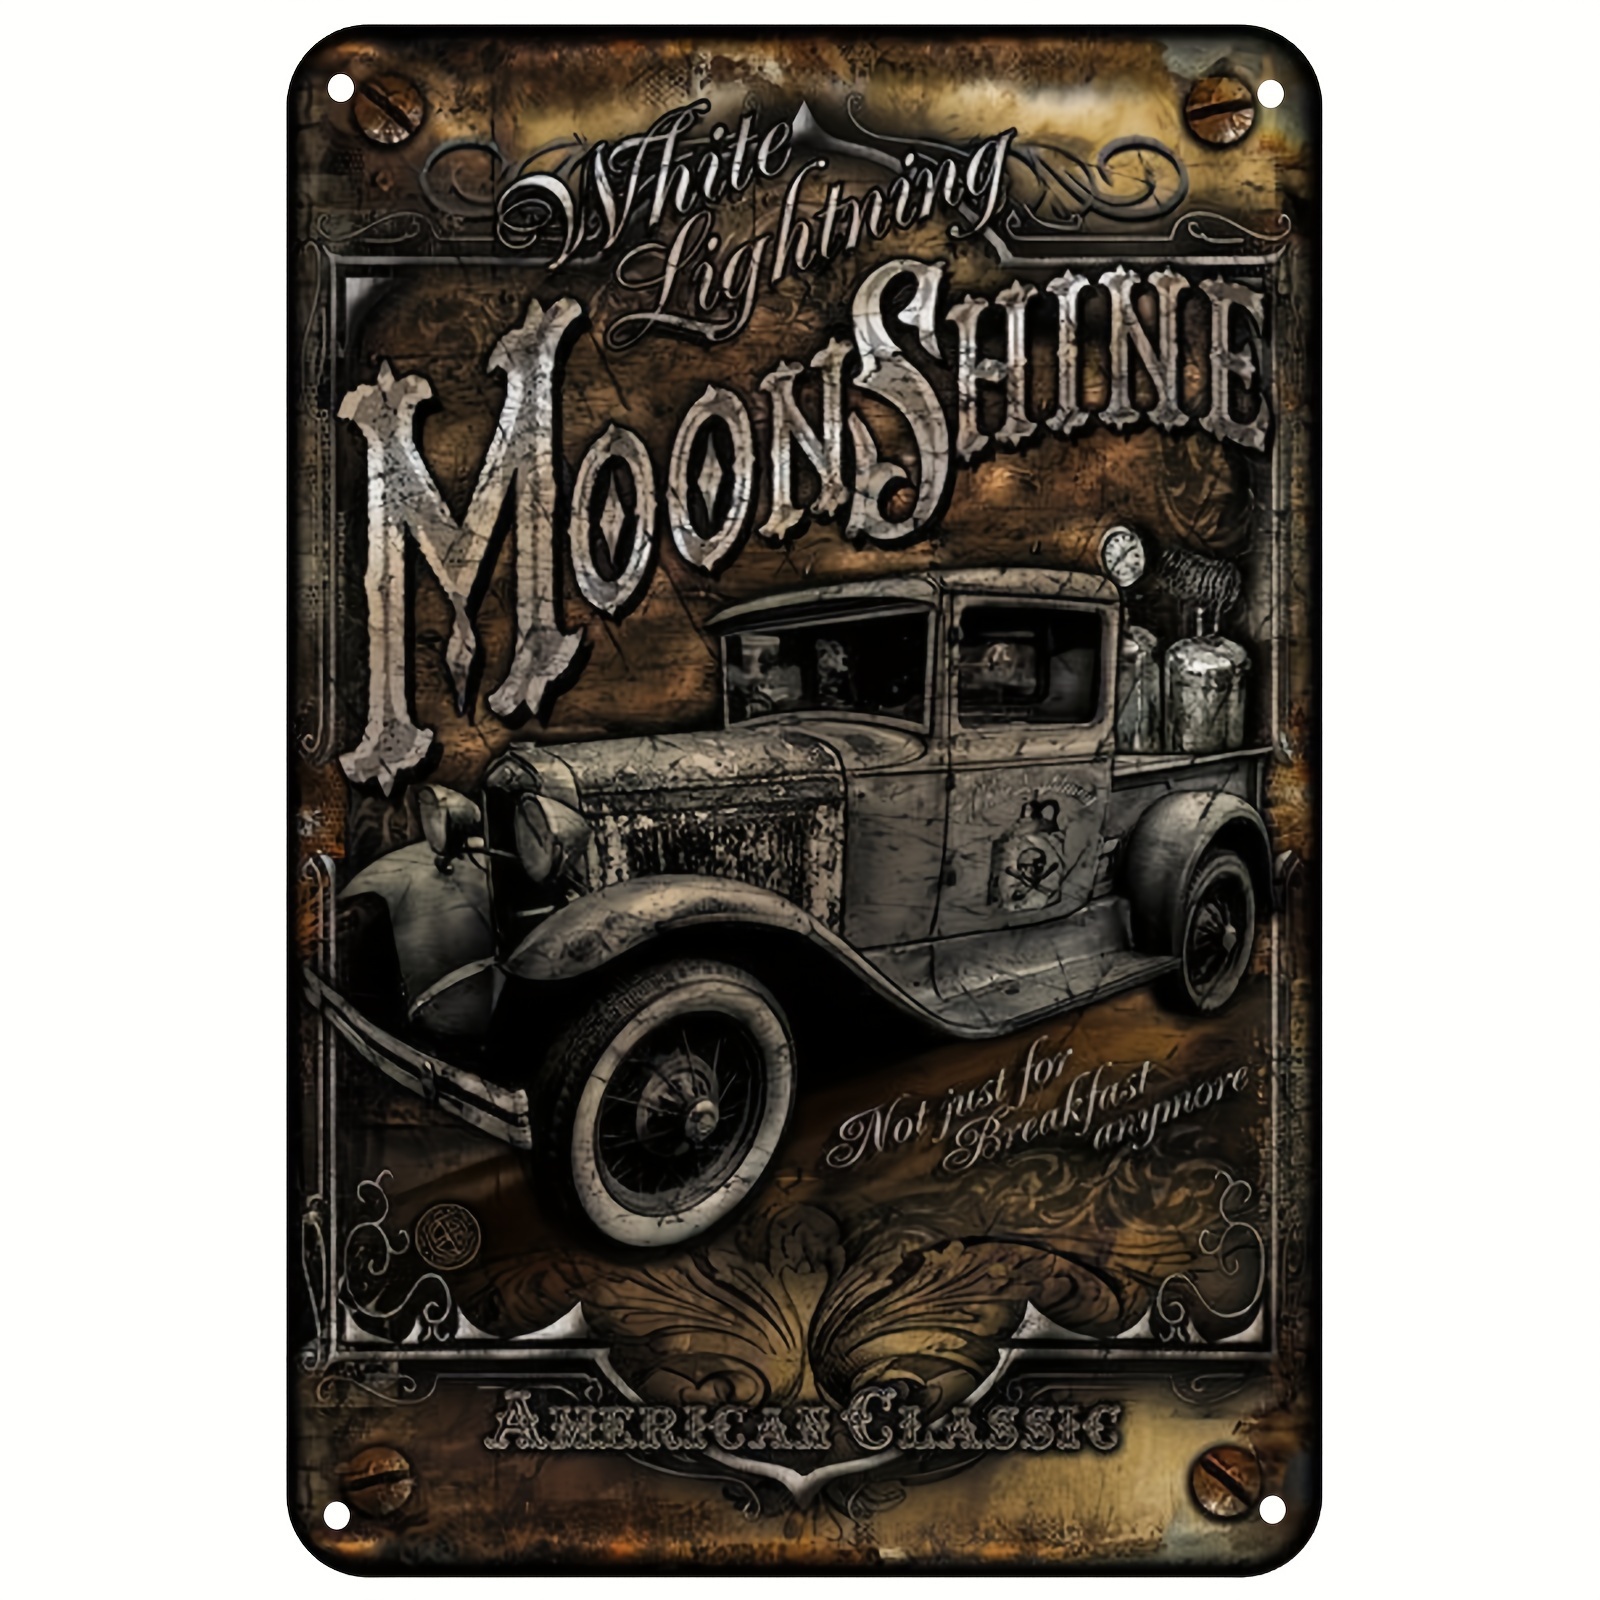 

Moonshine Truck Metal Tin Sign Wall Art Decor For Living Room Vintage Art Coffee Bar Signs Home Decor Gifts Decoration 8 X 12 Inches